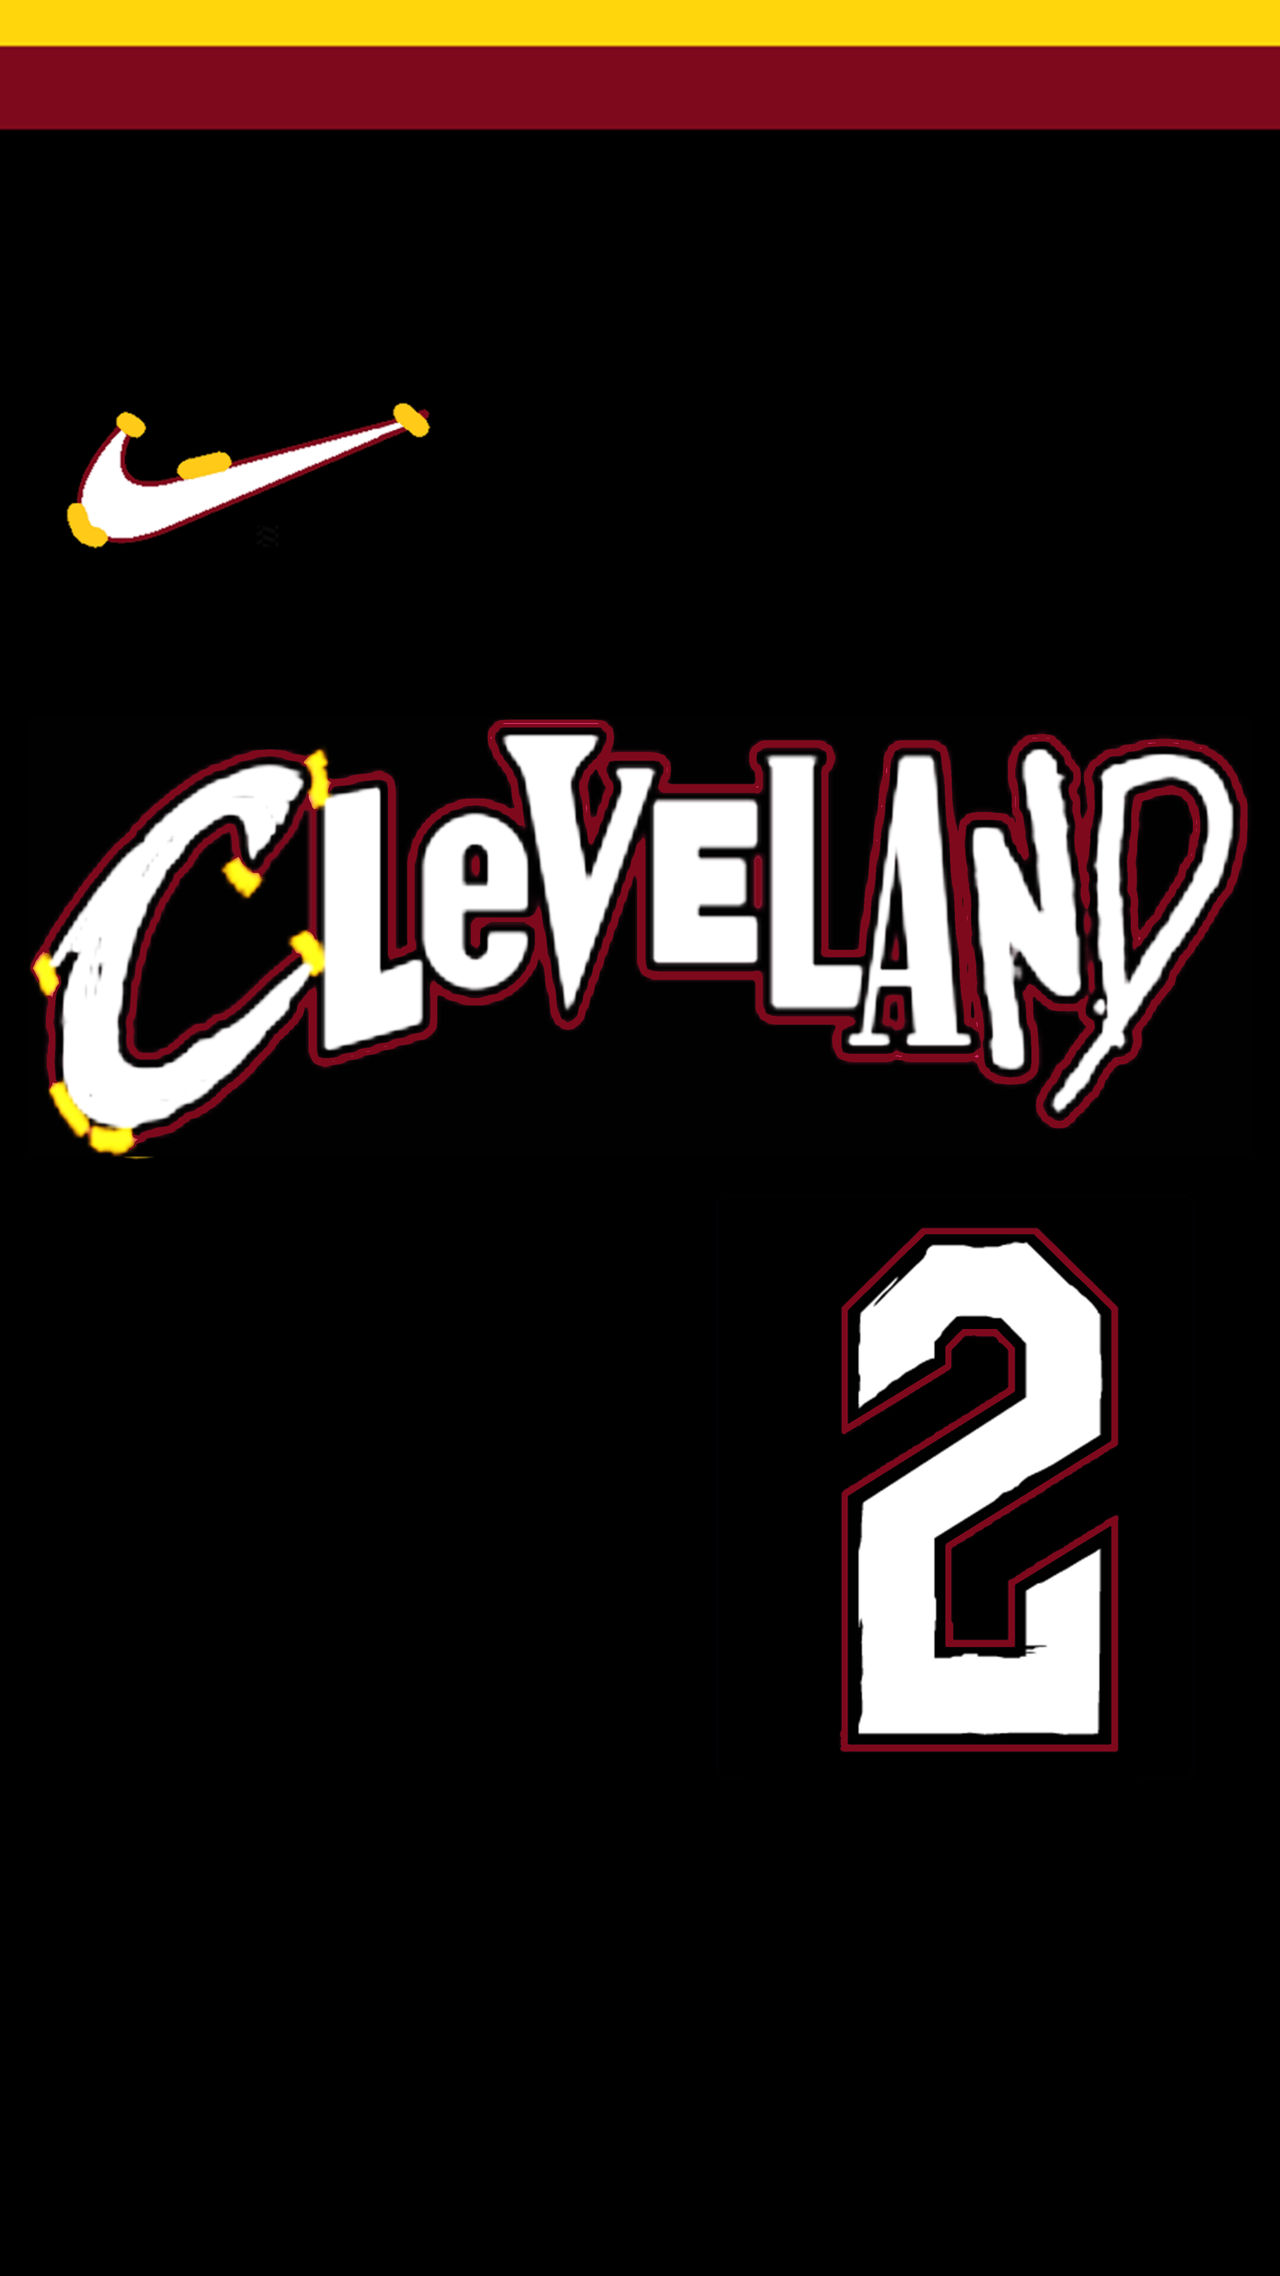 Cleveland Cavaliers City Jersey 2020-21 (leaked). 🔥or 🗑? : r